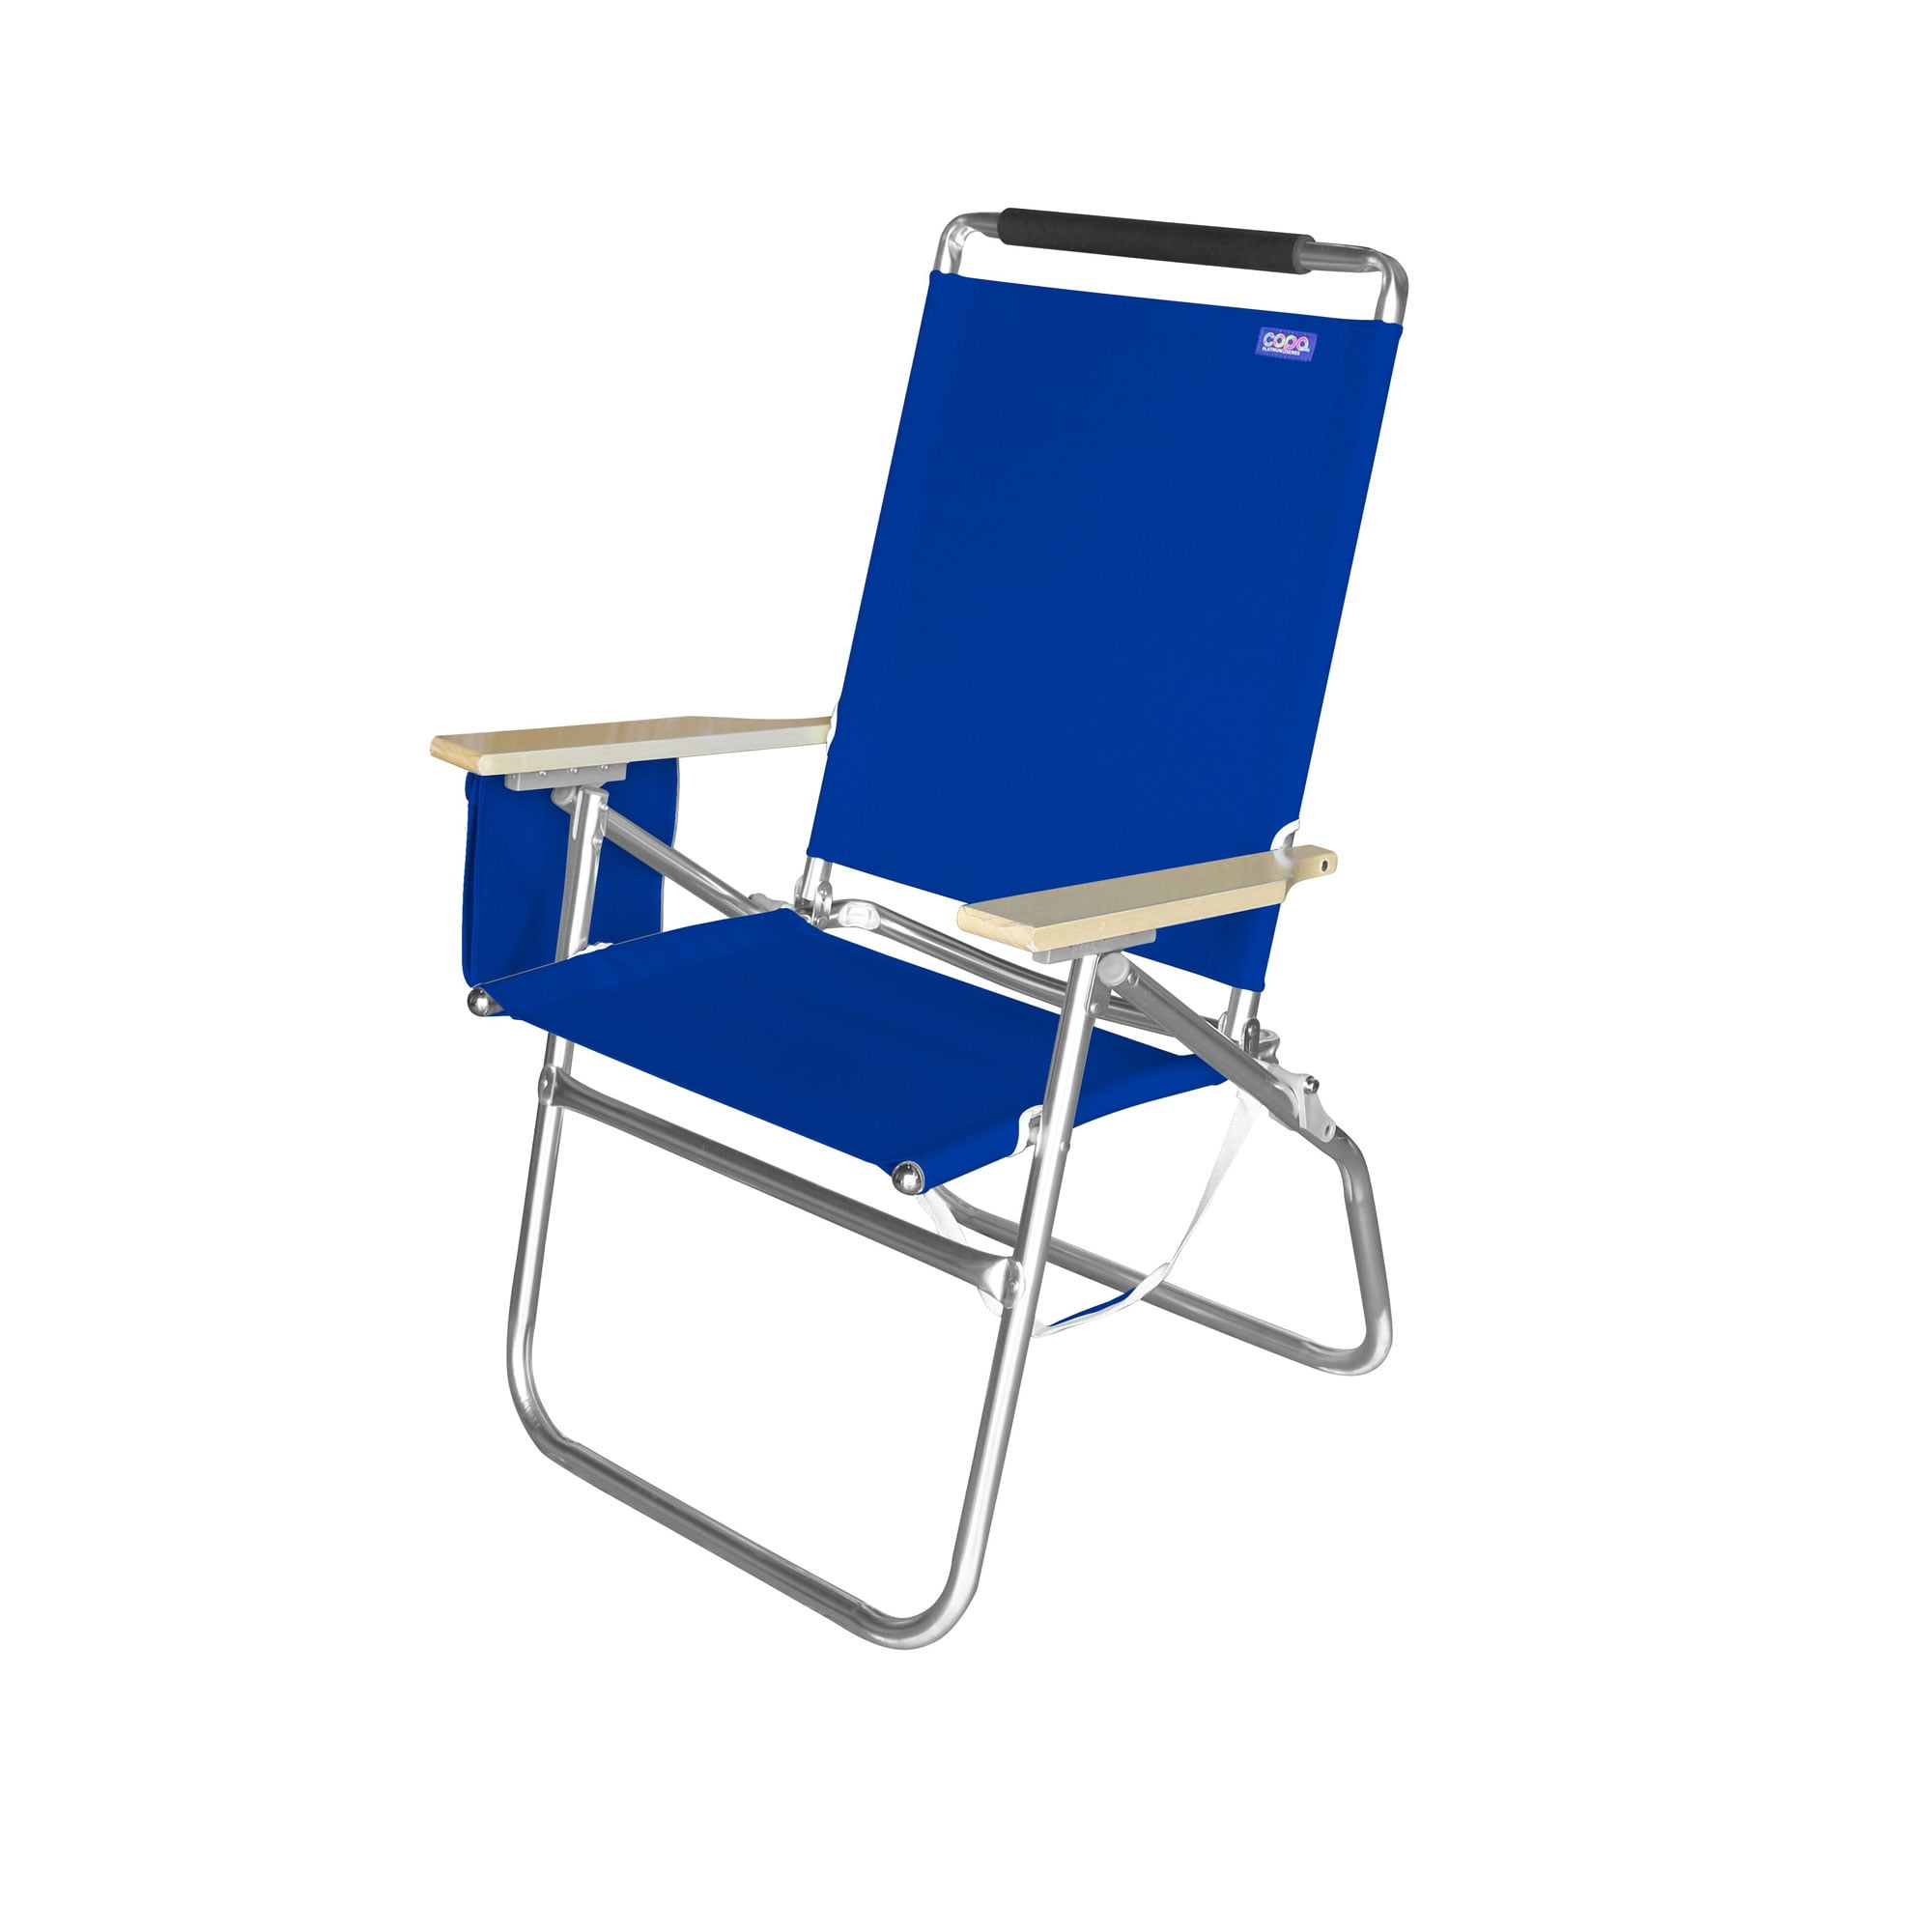 New Copa 5 Position Lay Flat Aluminum Beach Chair Pacific Blue for Large Space